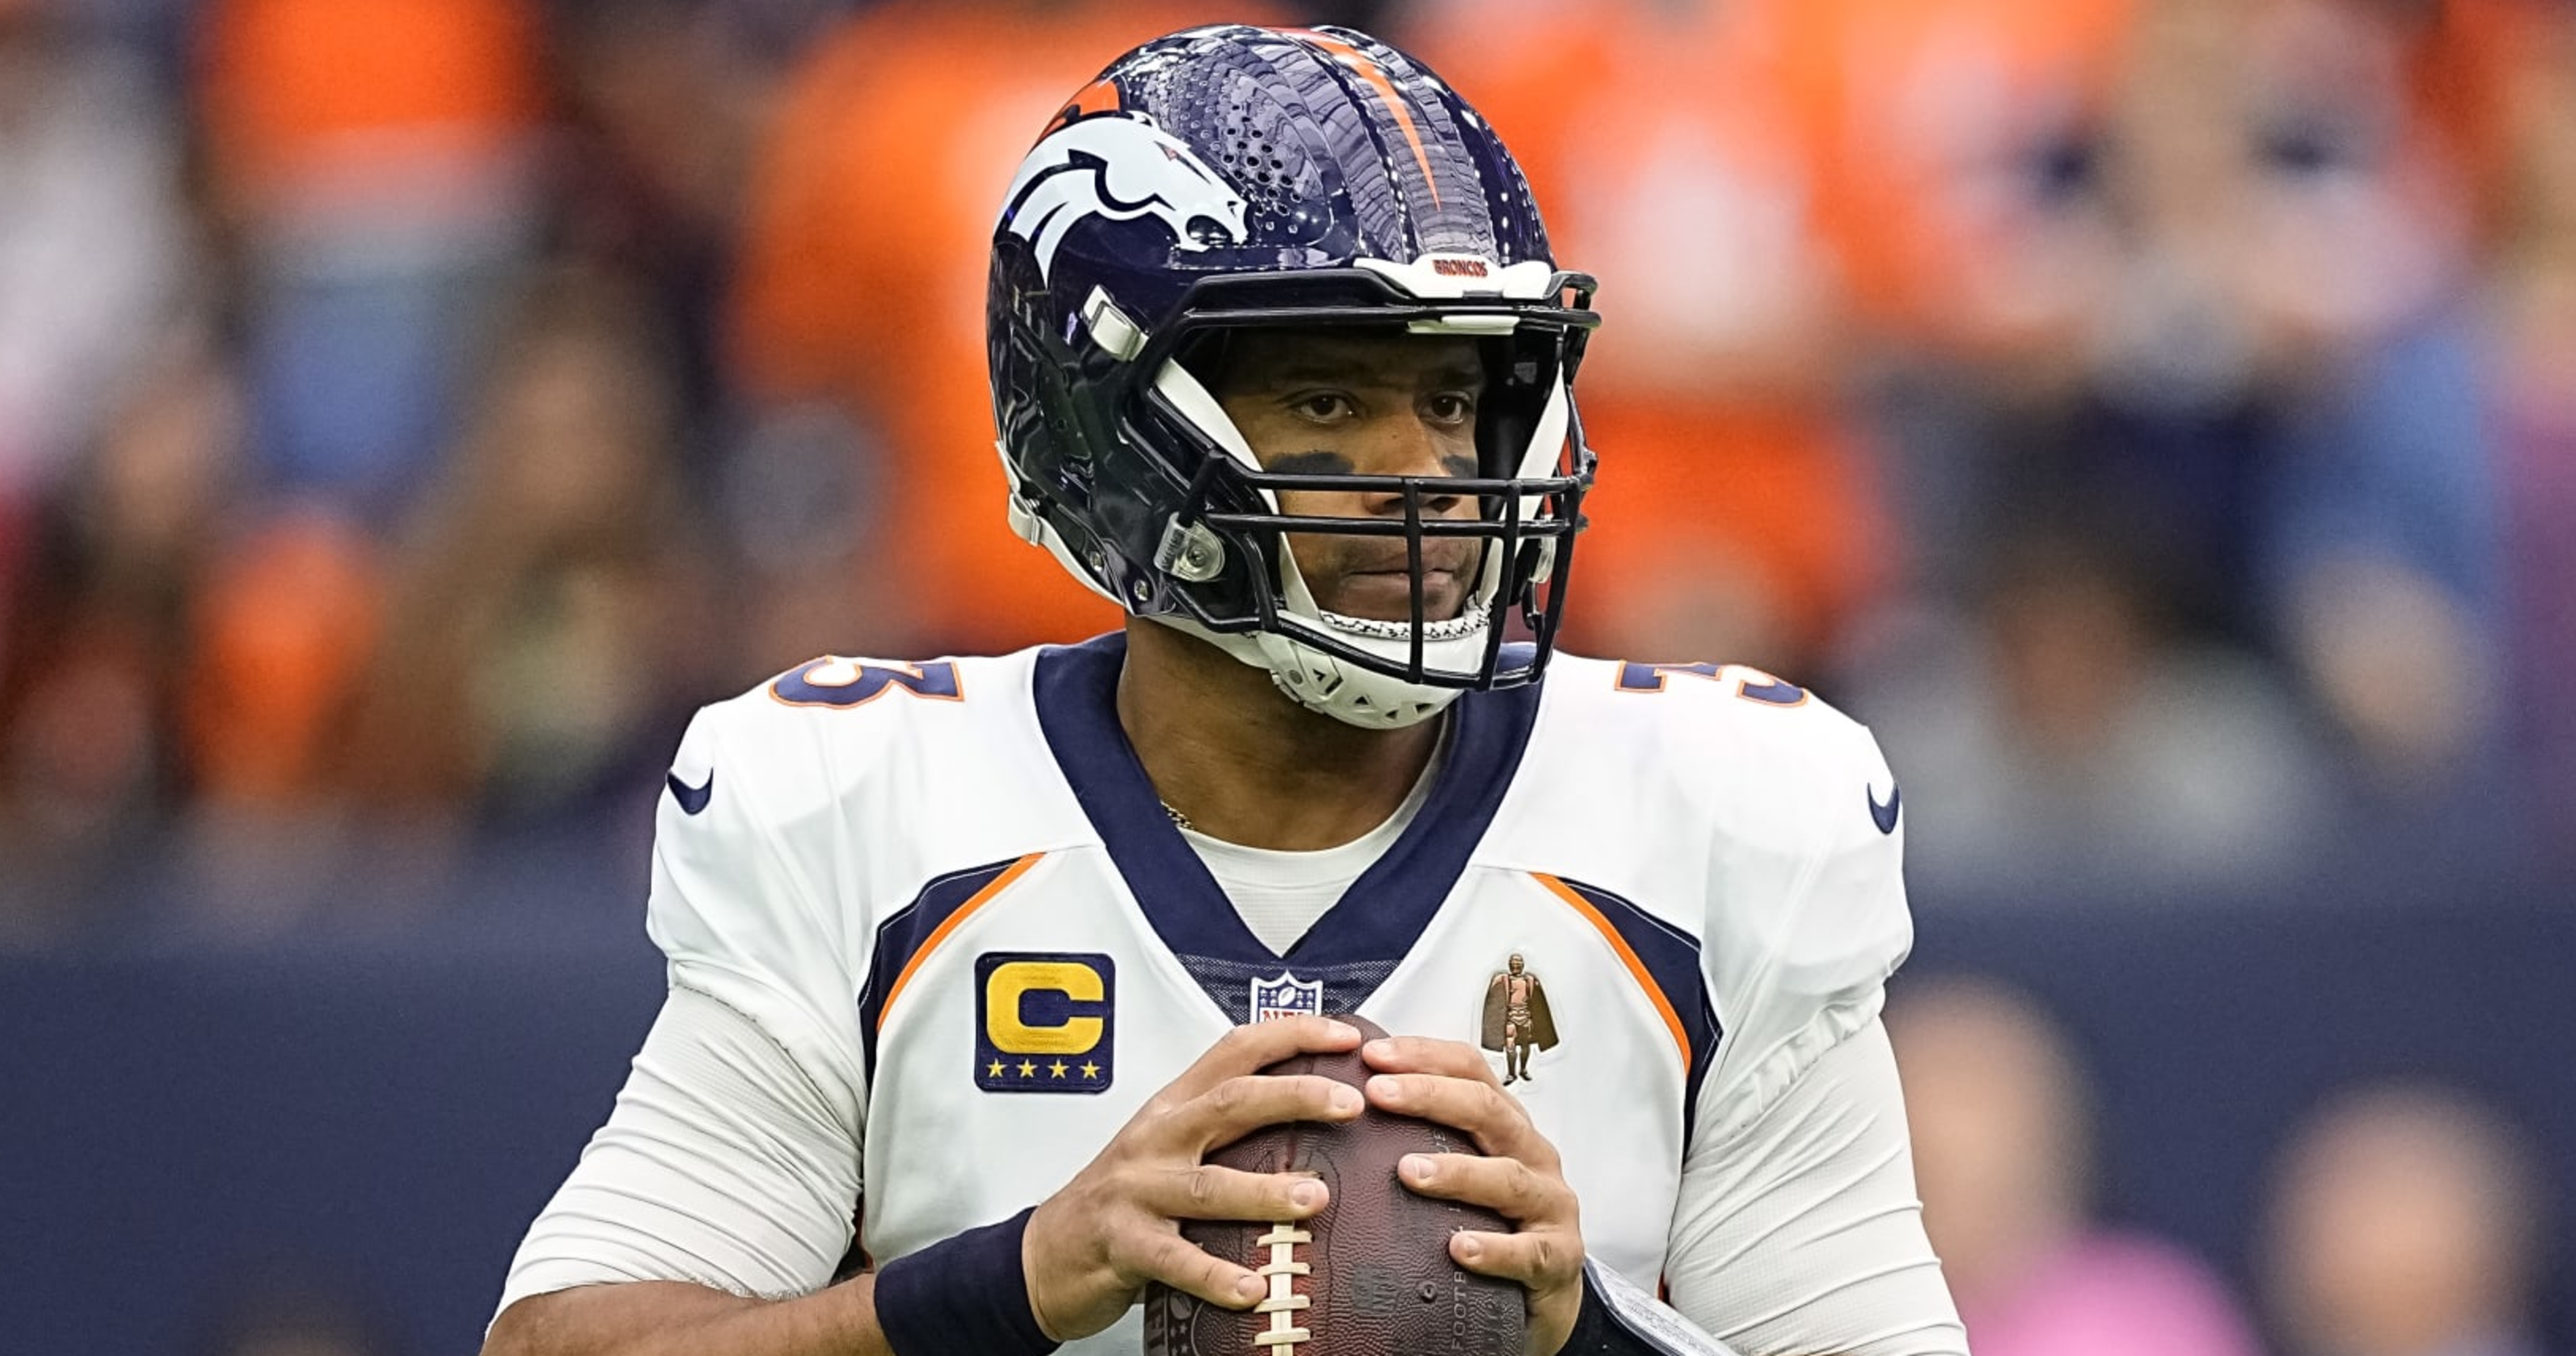 NFL Rumors: Giants Wouldn't Promise Russell Wilson Playing Time During Contract Talks